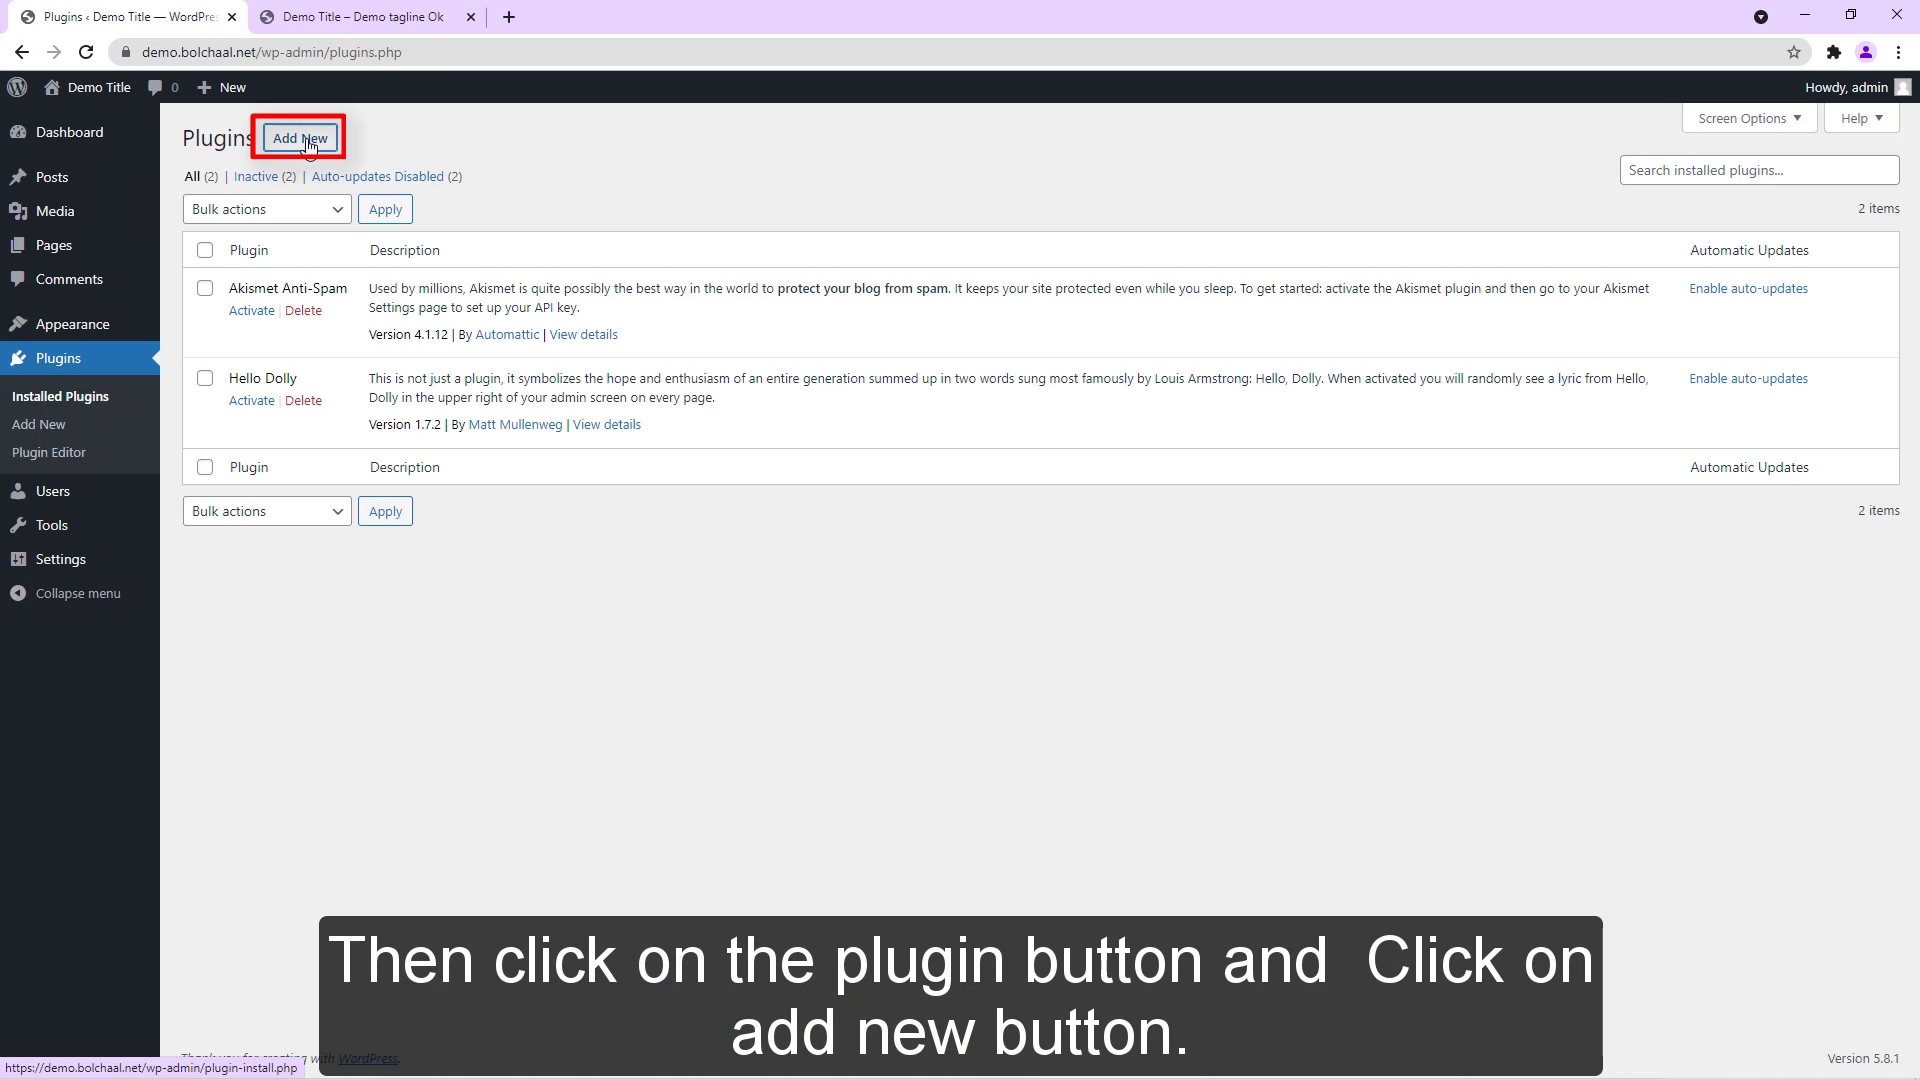 click on the plugin button